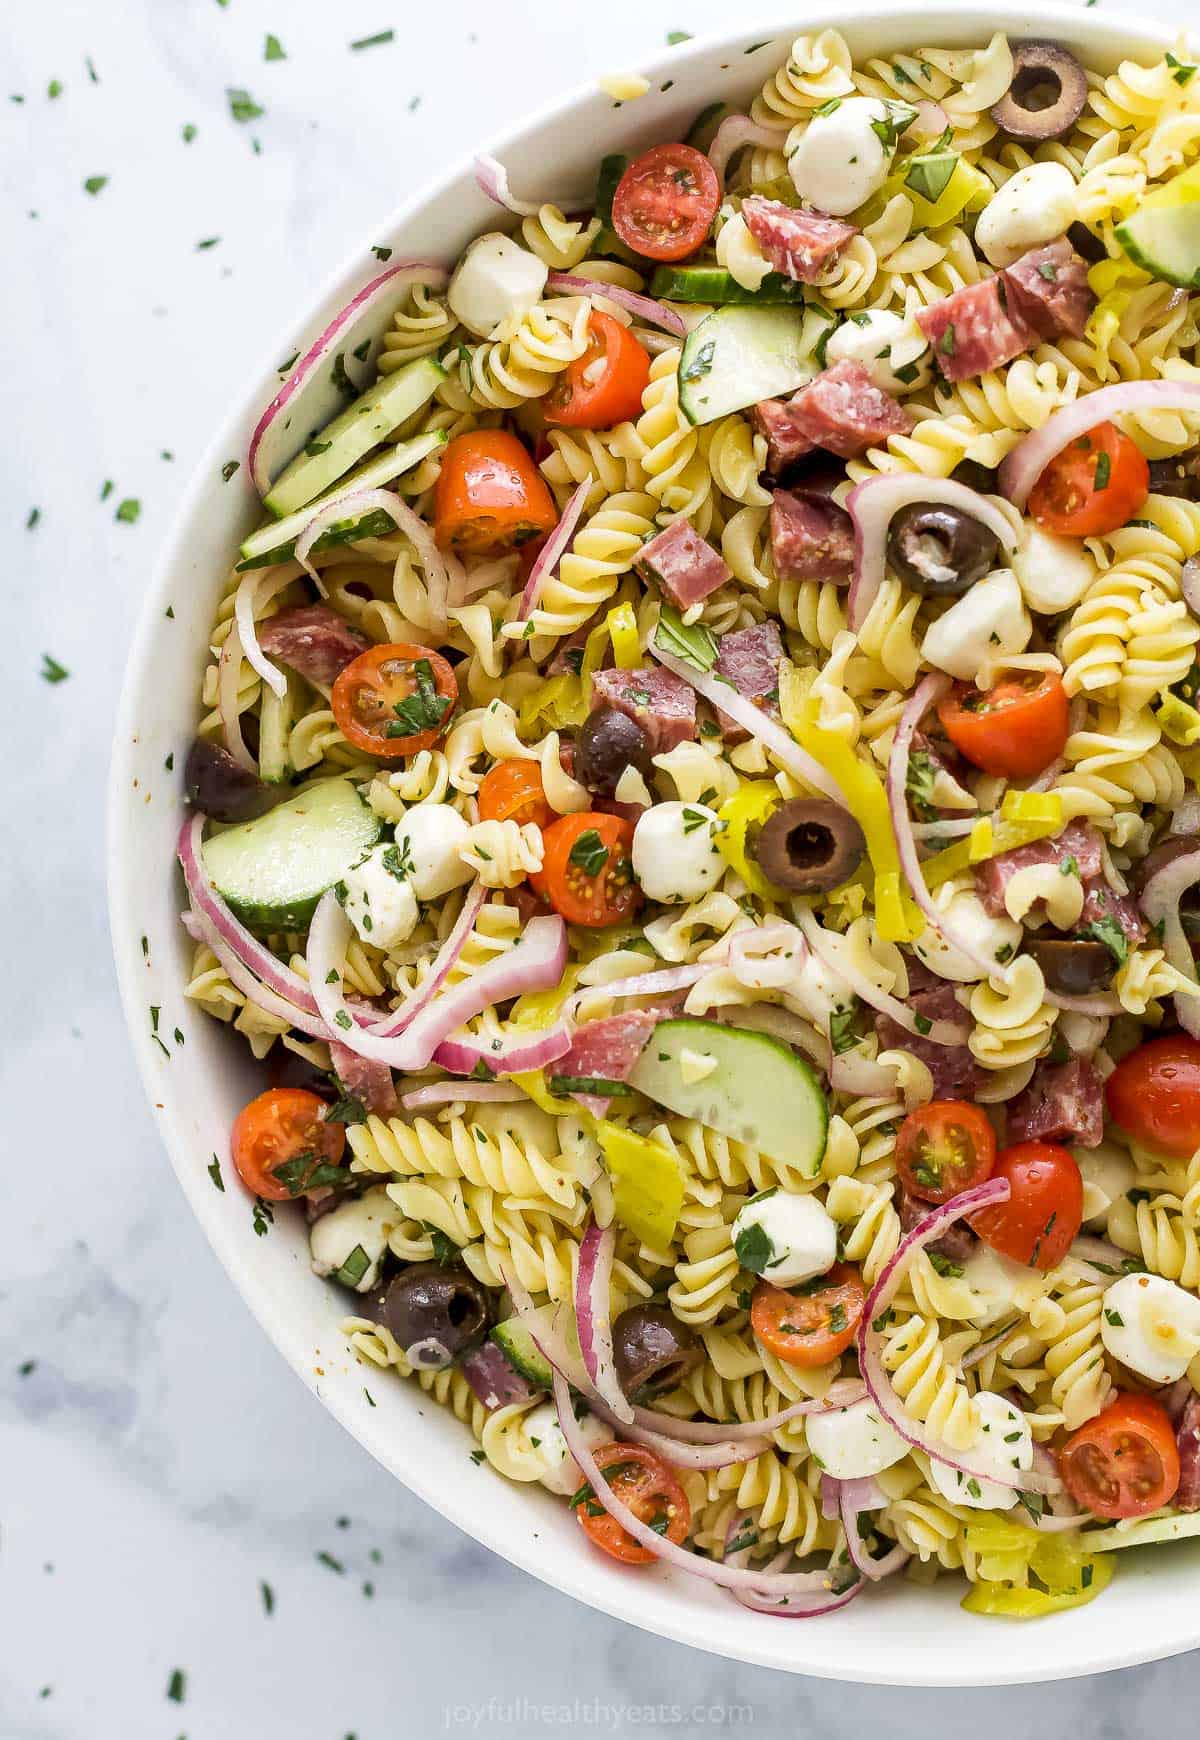 A large bowl of pasta salad on a marble kitchen countertop